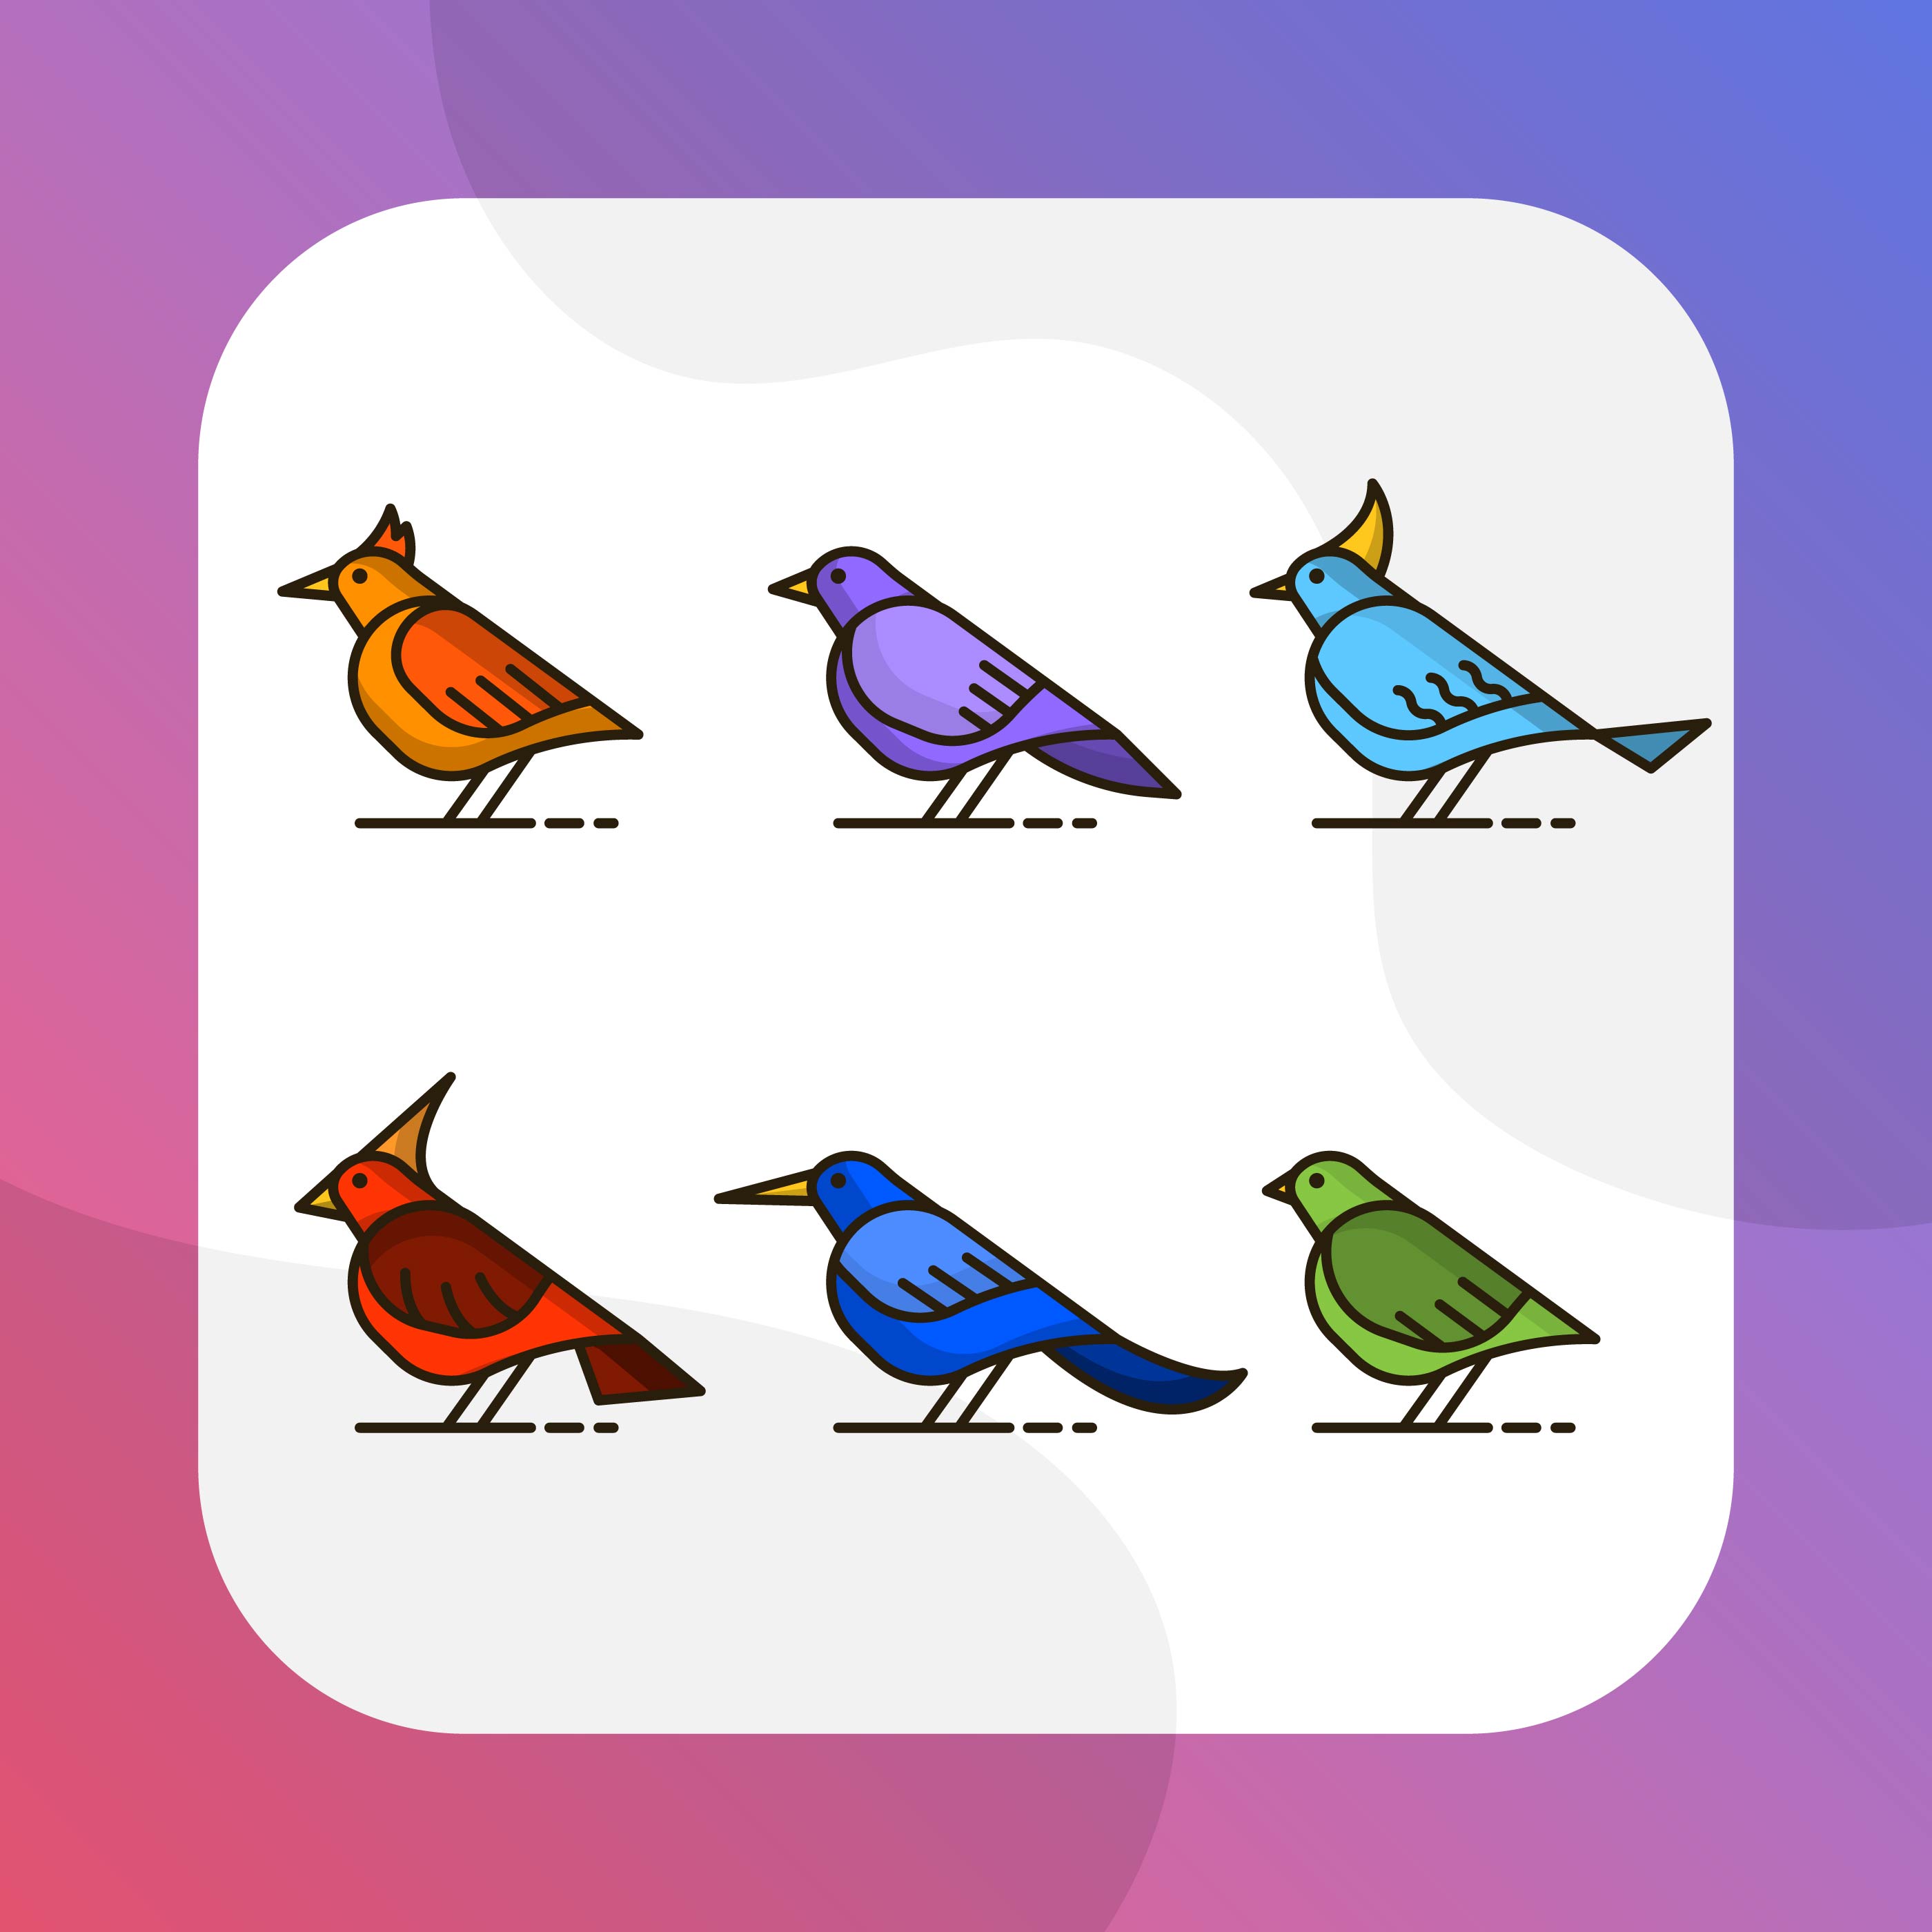 Download Flat Colorful Bird With Outline Vector Clipart Collection - Download Free Vectors, Clipart ...